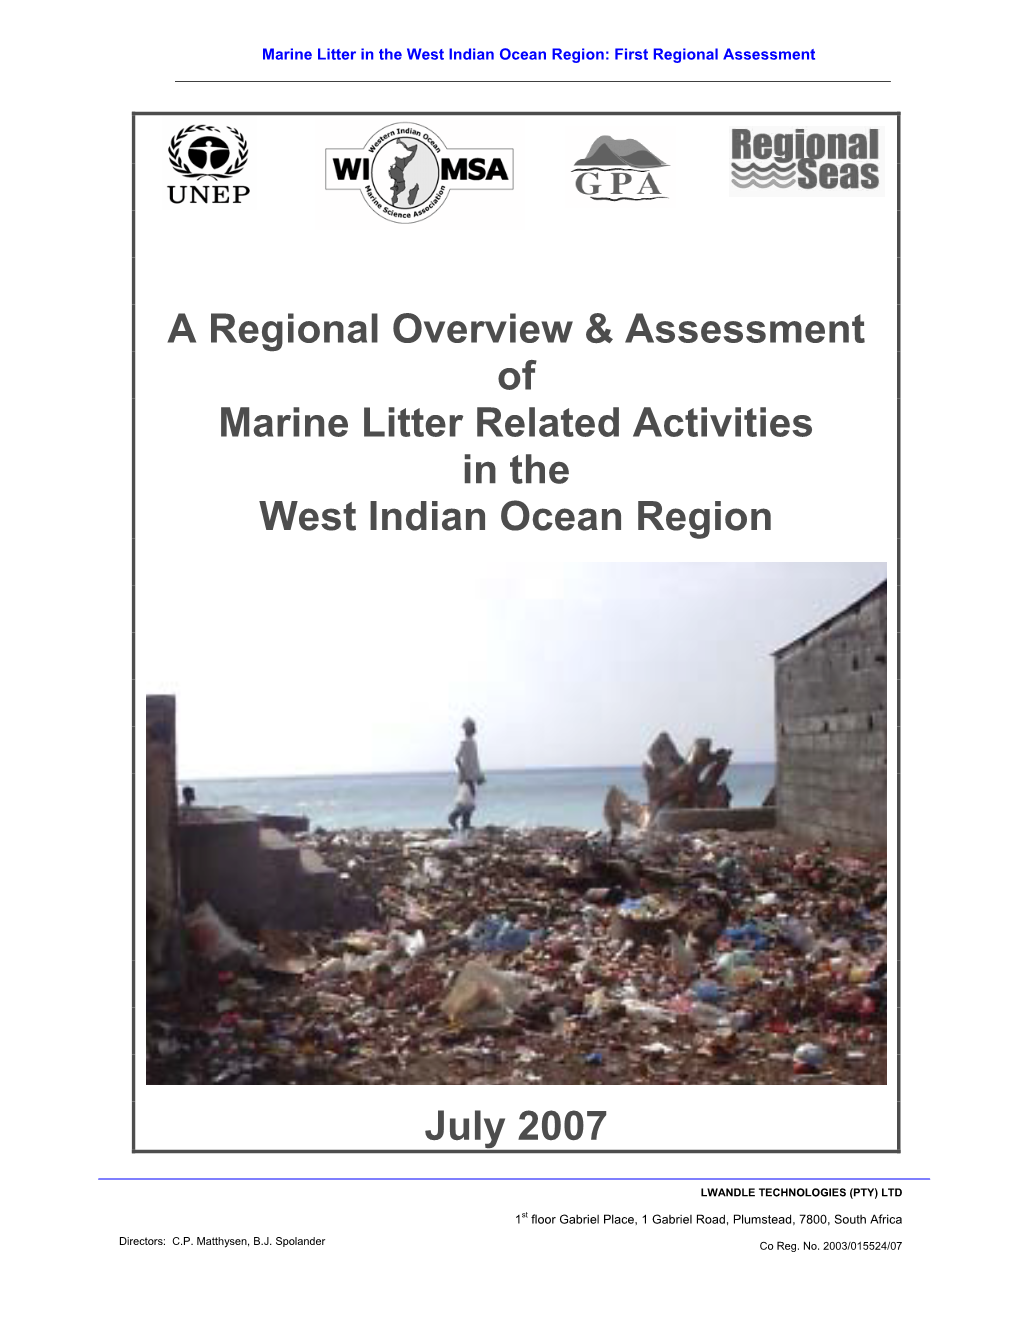 A Regional Overview & Assessment of Marine Litter Related Activities In